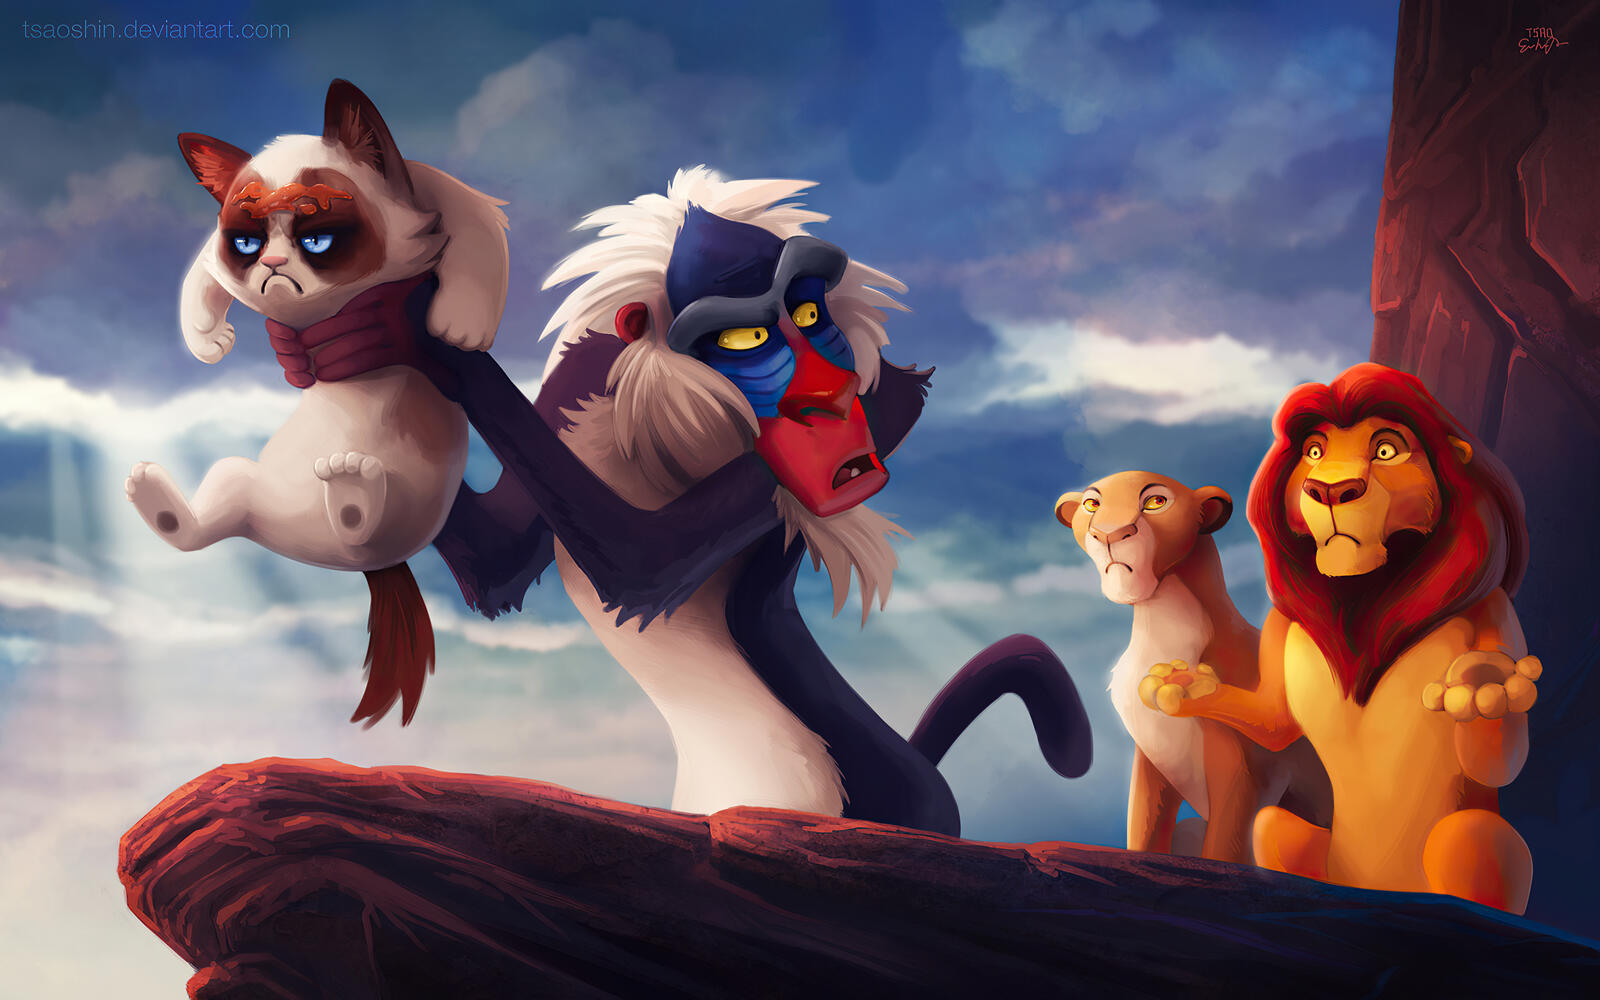 Wallpapers 2019 Movies deviant art simba on the desktop